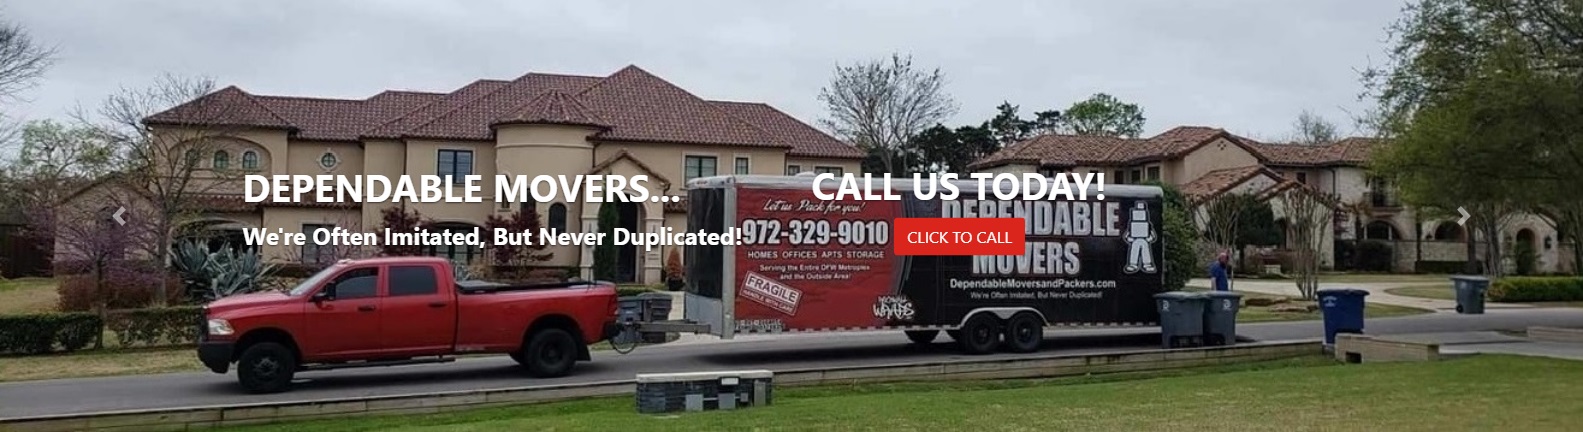 Dependable Movers in the McKinney Texas area - Home Office Apartment Movers Residential Commercial Movers in the McKinney Texas area